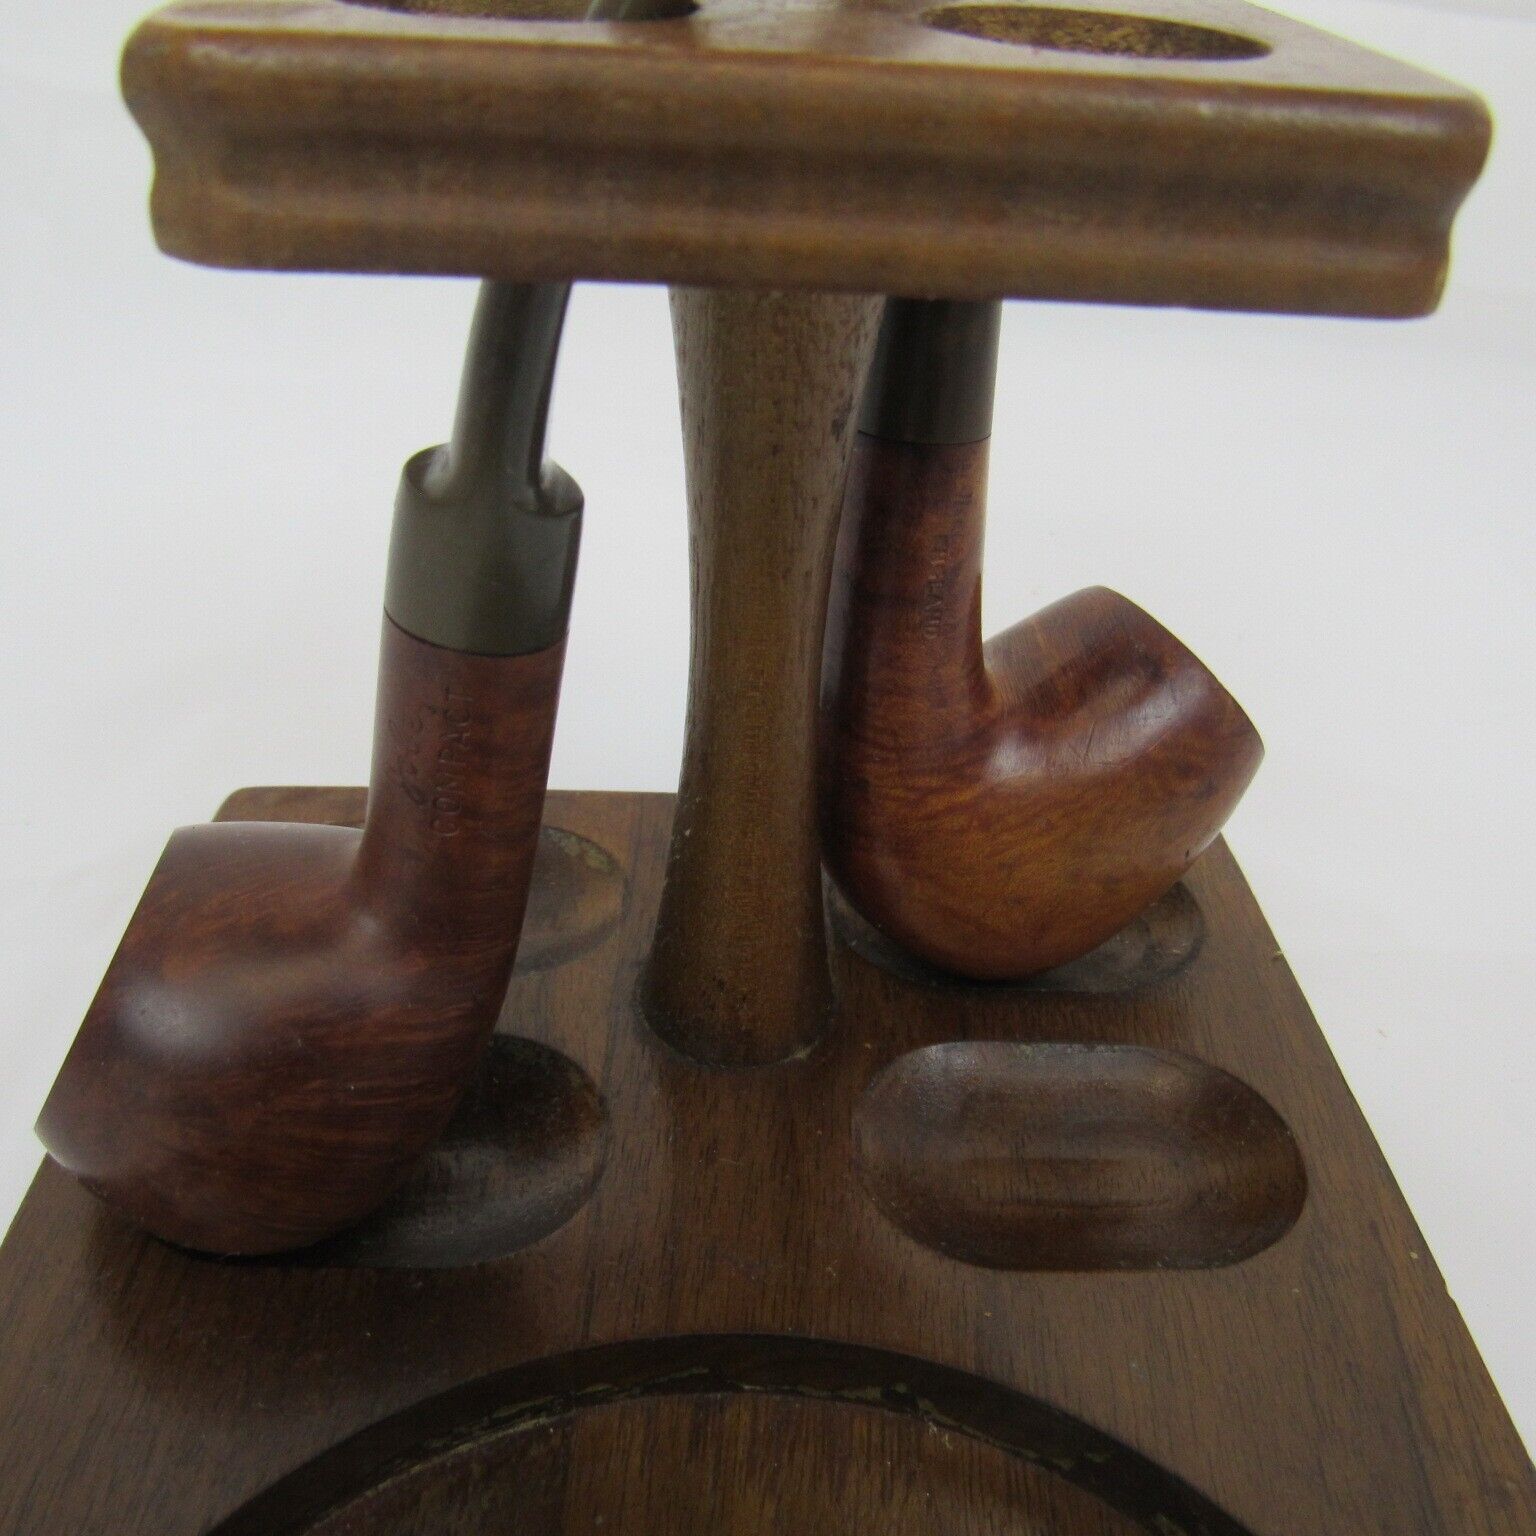 Decatur Industries 4 Pipe Stand with Two Vintage Pipes Jobey Compact Walnut Wood